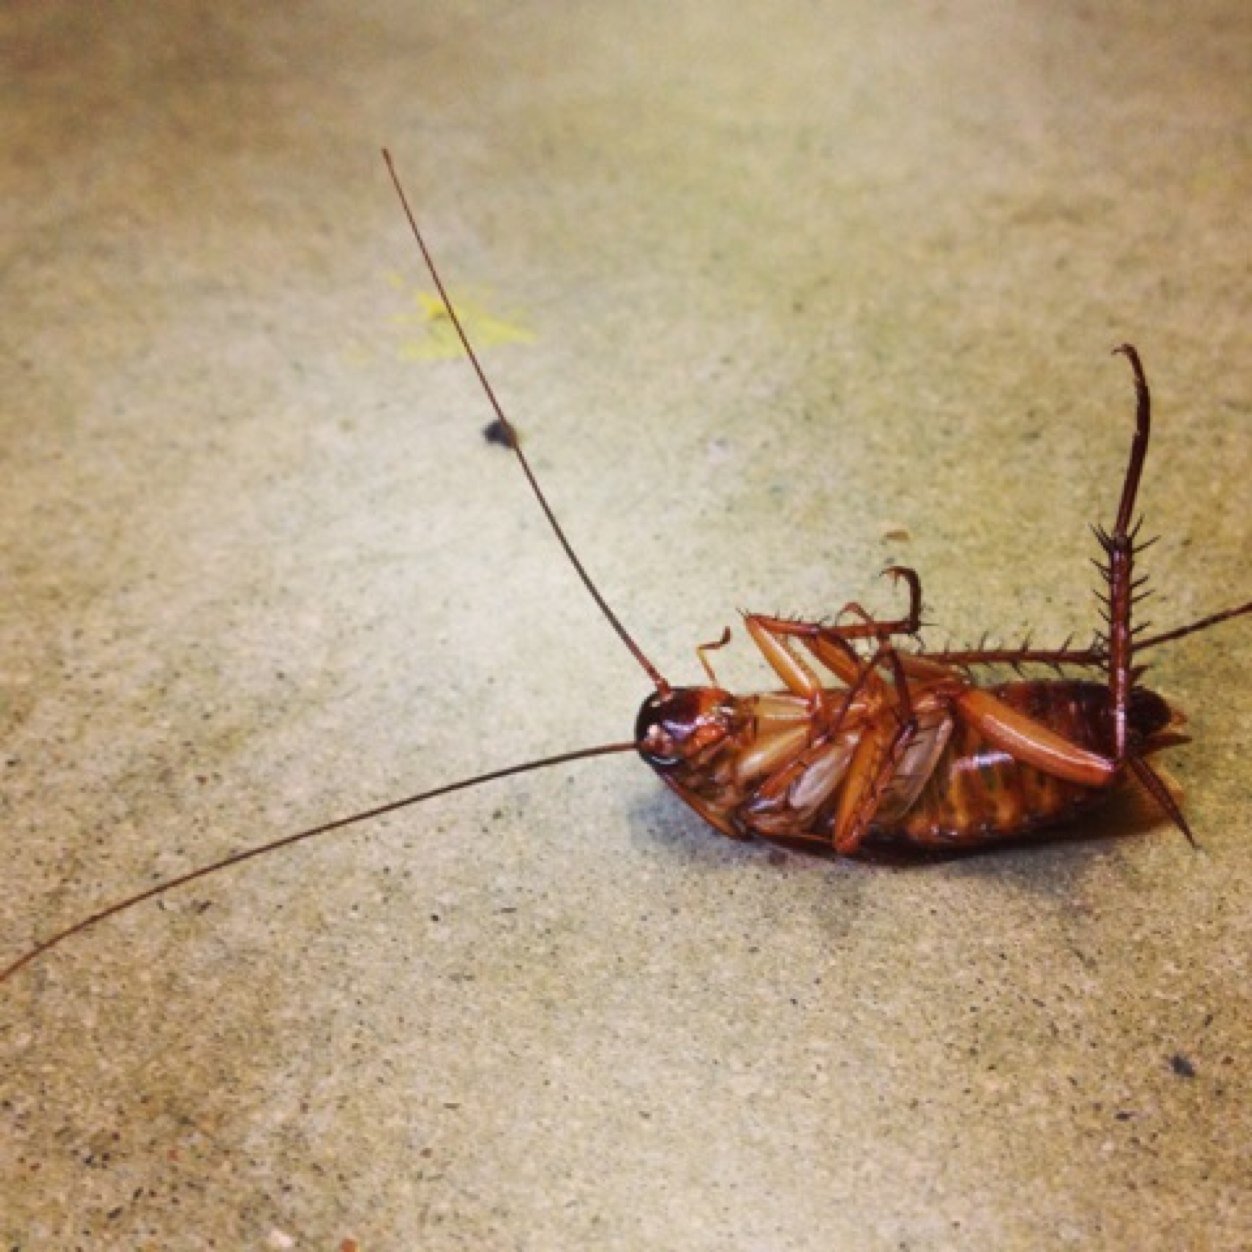 amoureuse de l'absurde. angoissée. cockroach was alive at time of photo #myoffice